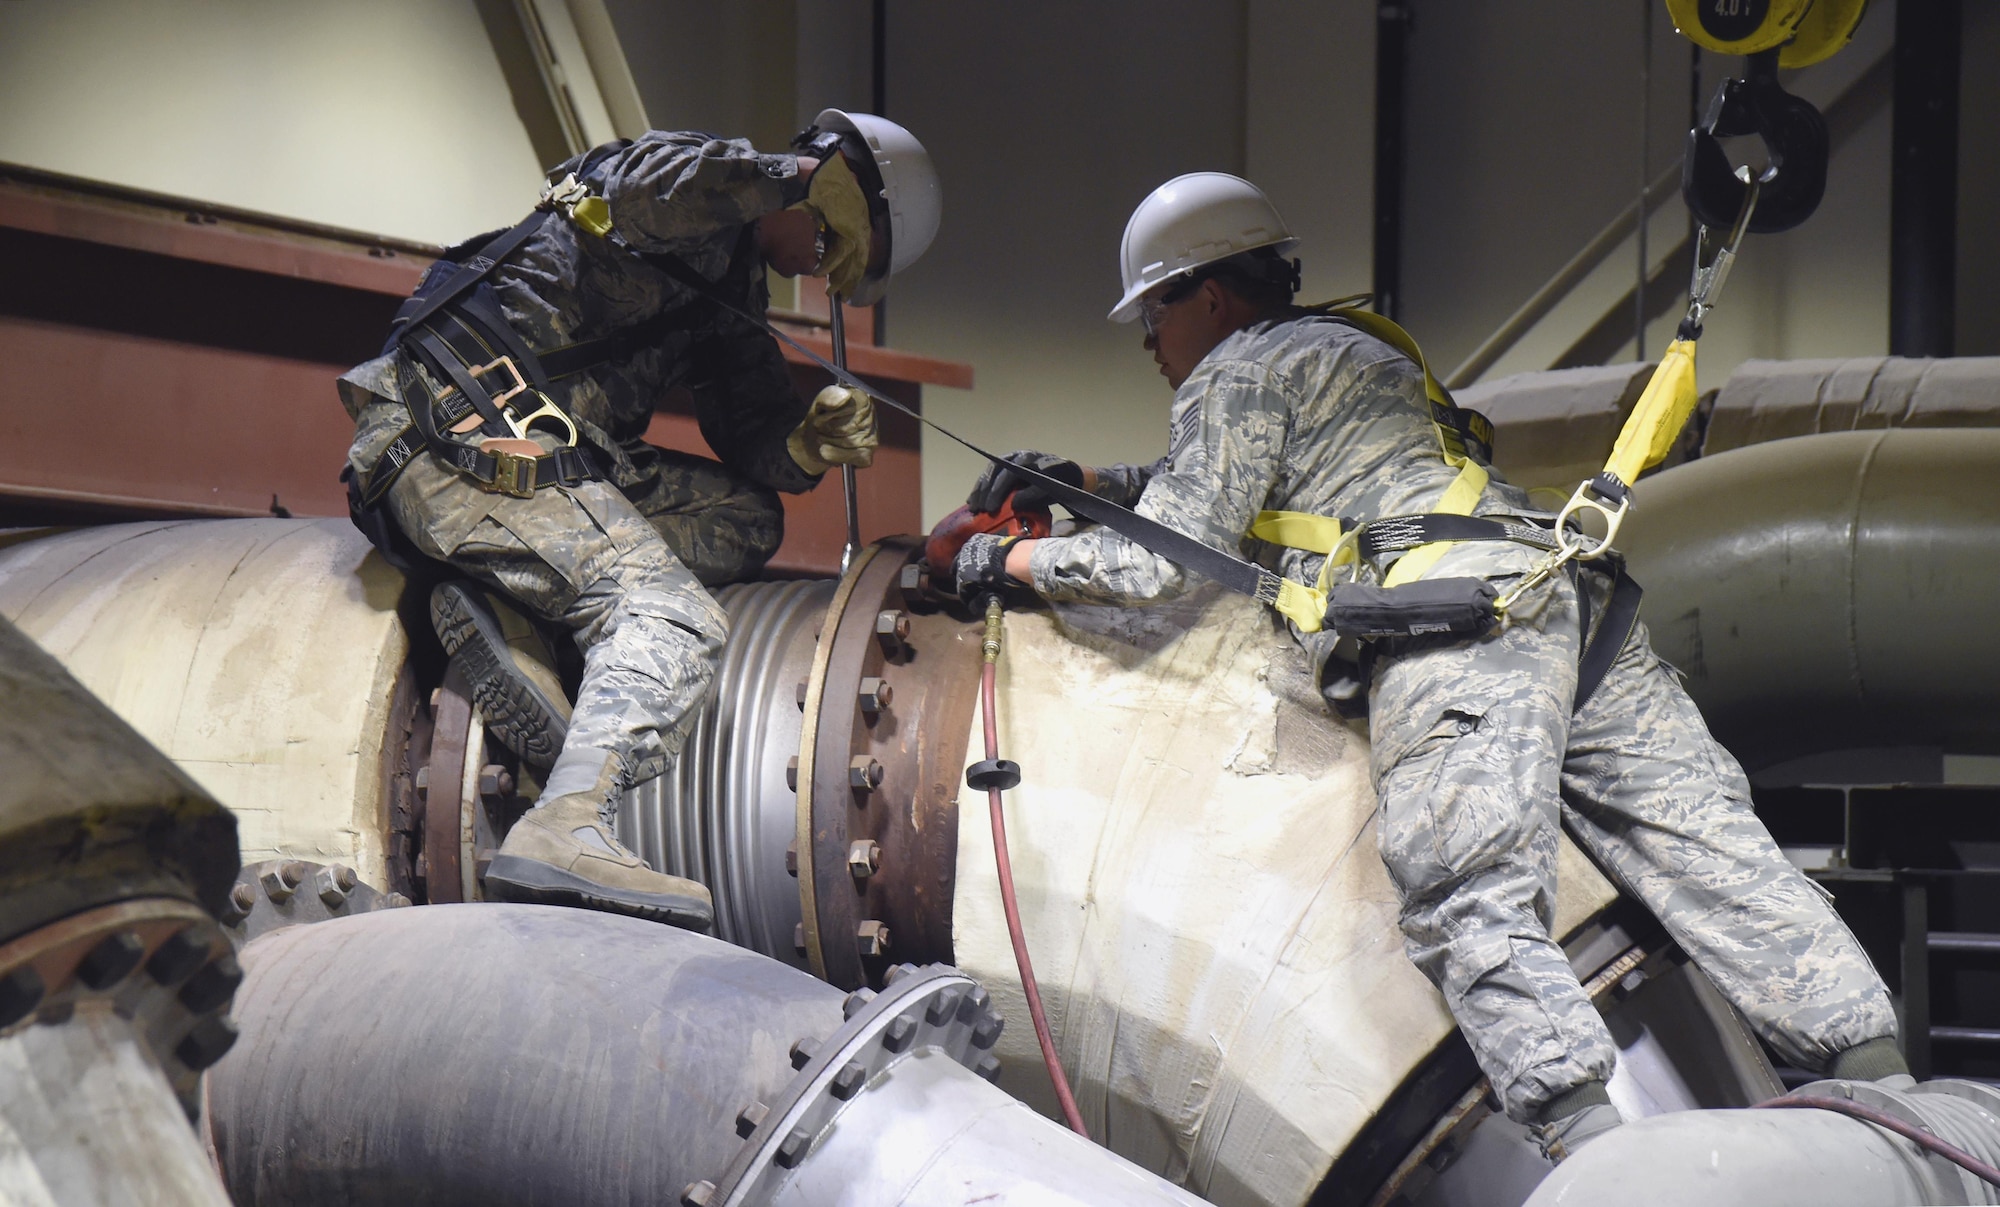 Tech. Sgt. Jon Vinson and Senior Airman Mason Conner with the 446th Civil Engineer Squadron from Joint Base Lewis-McChord, Washington, replace power production equipment at Schriever Air Force Base, Colorado Thursday June 15, 2017. For 446 CES Airmen, this has been an opportunity to become more proficient in their job and experience unique training opportunities. (U.S. Air Force photo/Senior Airman Arielle Vasquez)